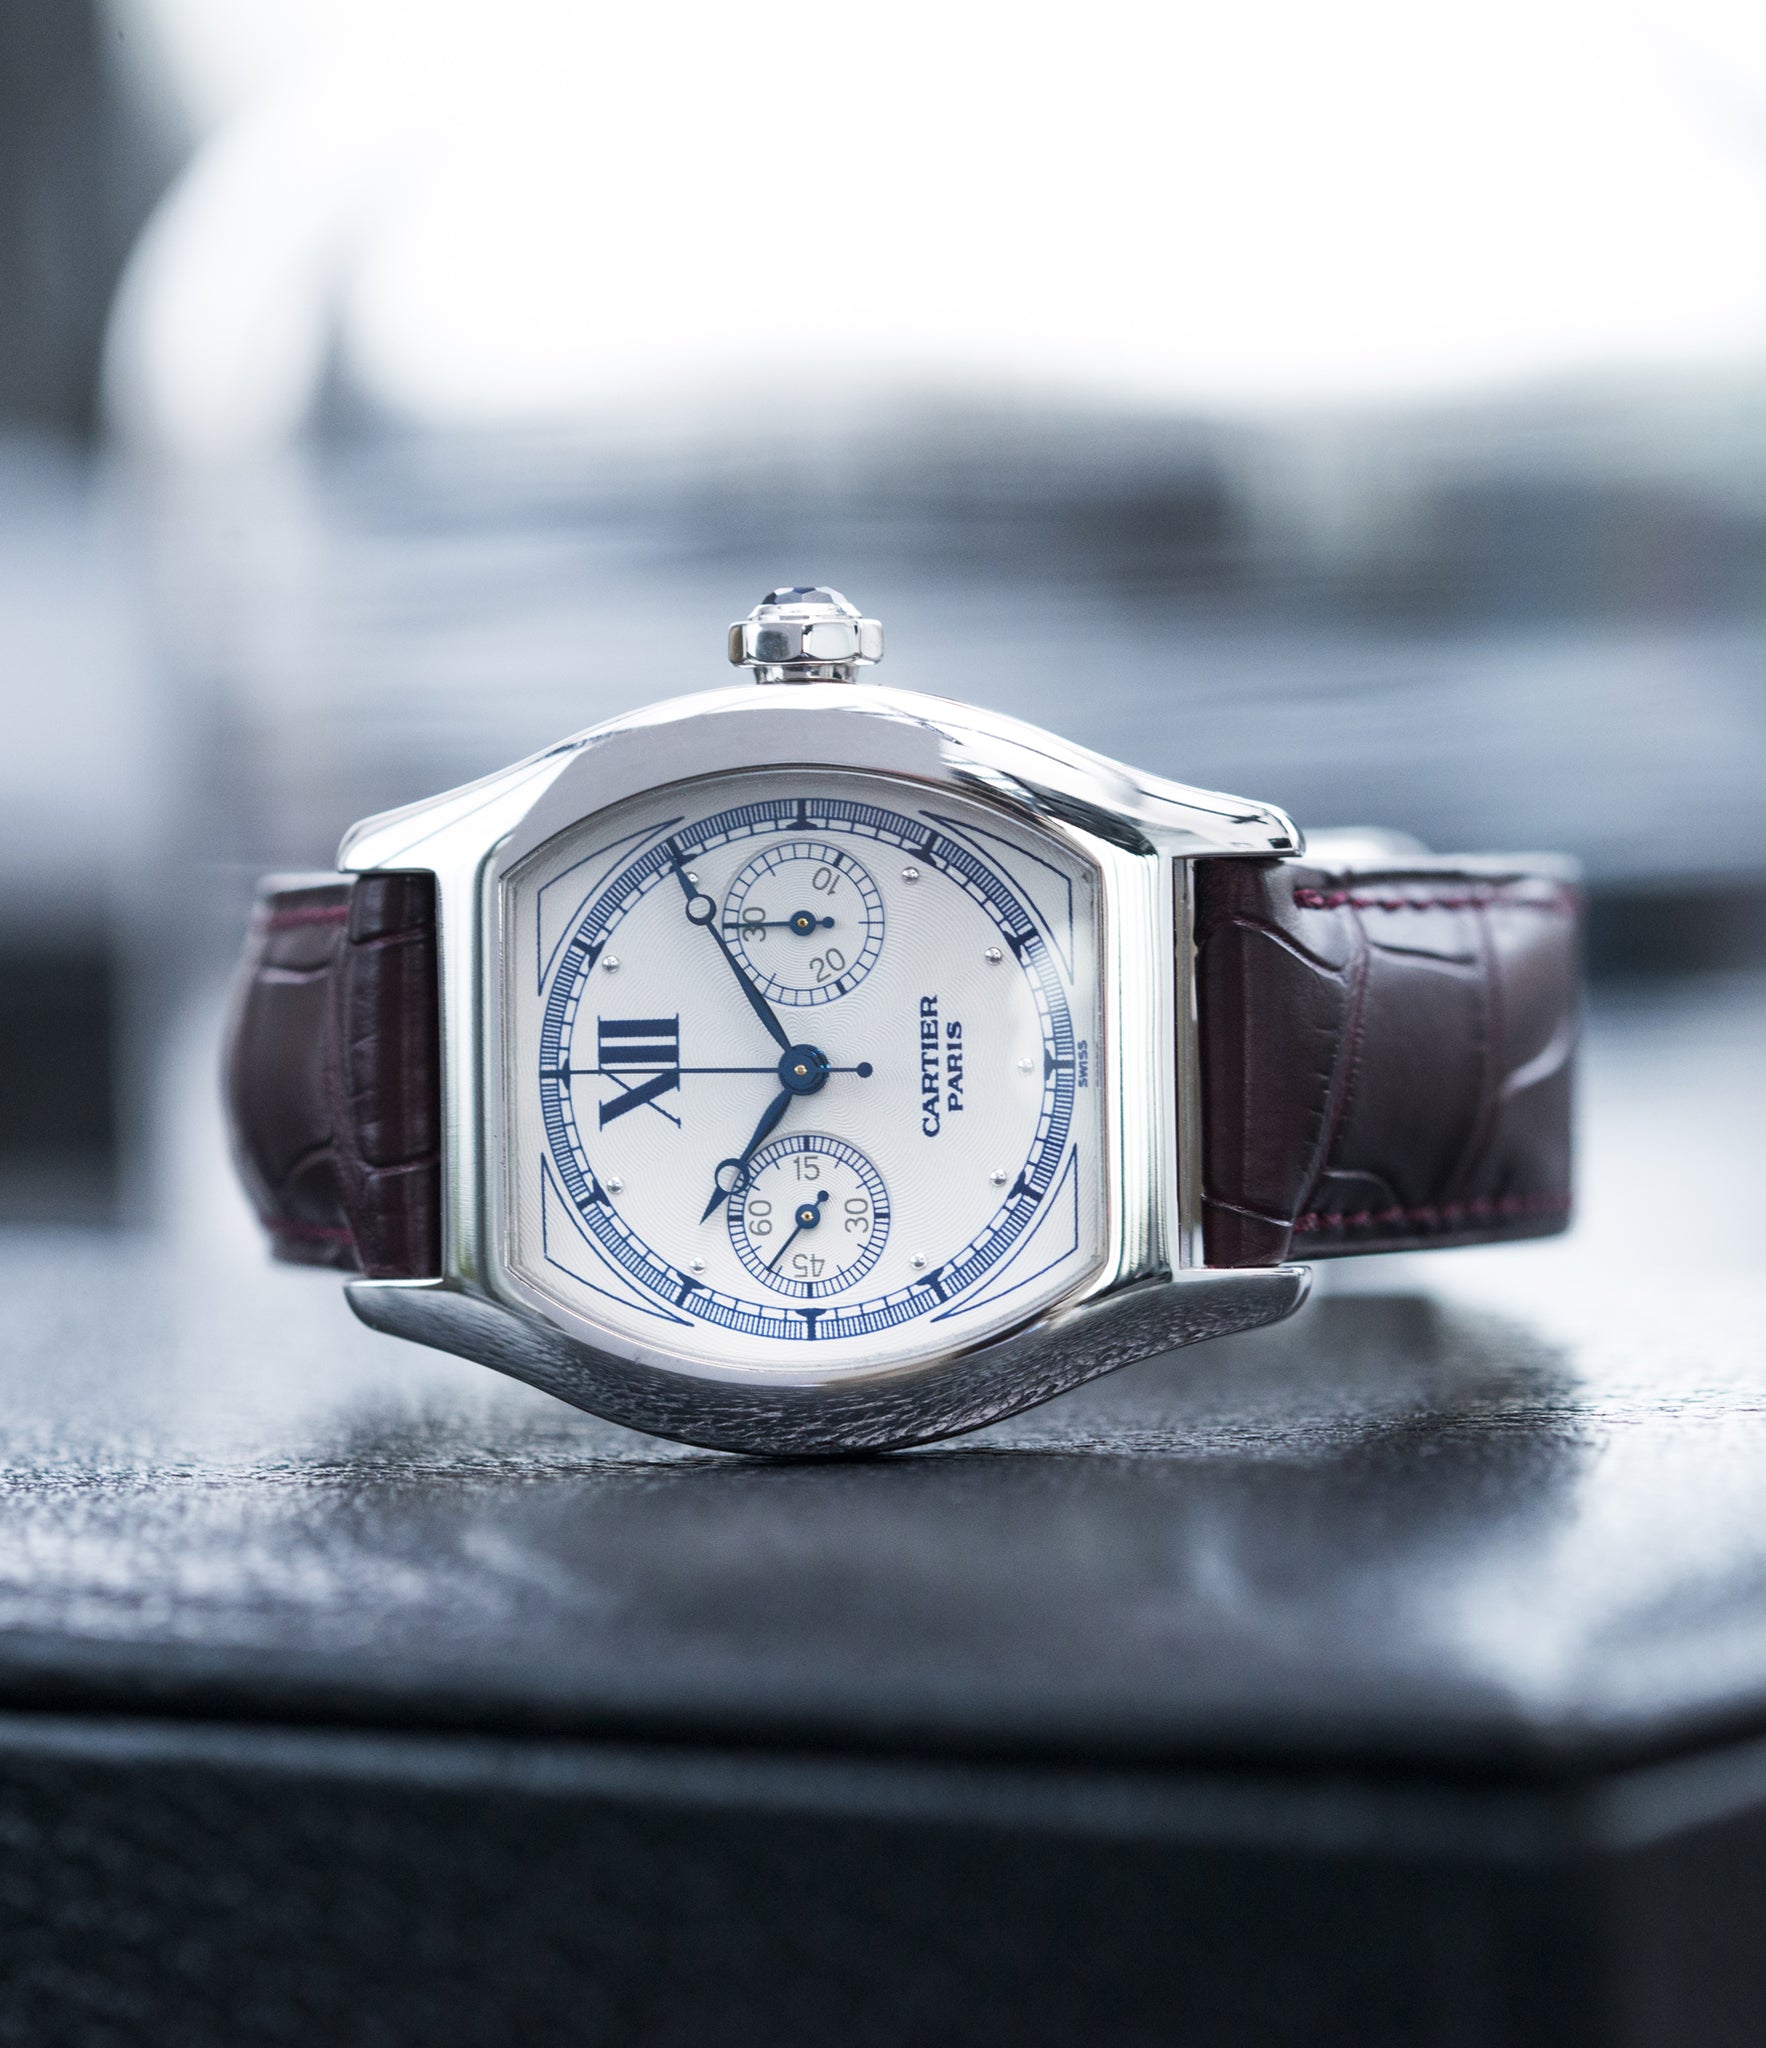 sell Cartier Monopusher Monopoussoir ref. 2396 white gold dress watch with THA ebauche for sale online at A Collected Man London UK specialist of rare watches